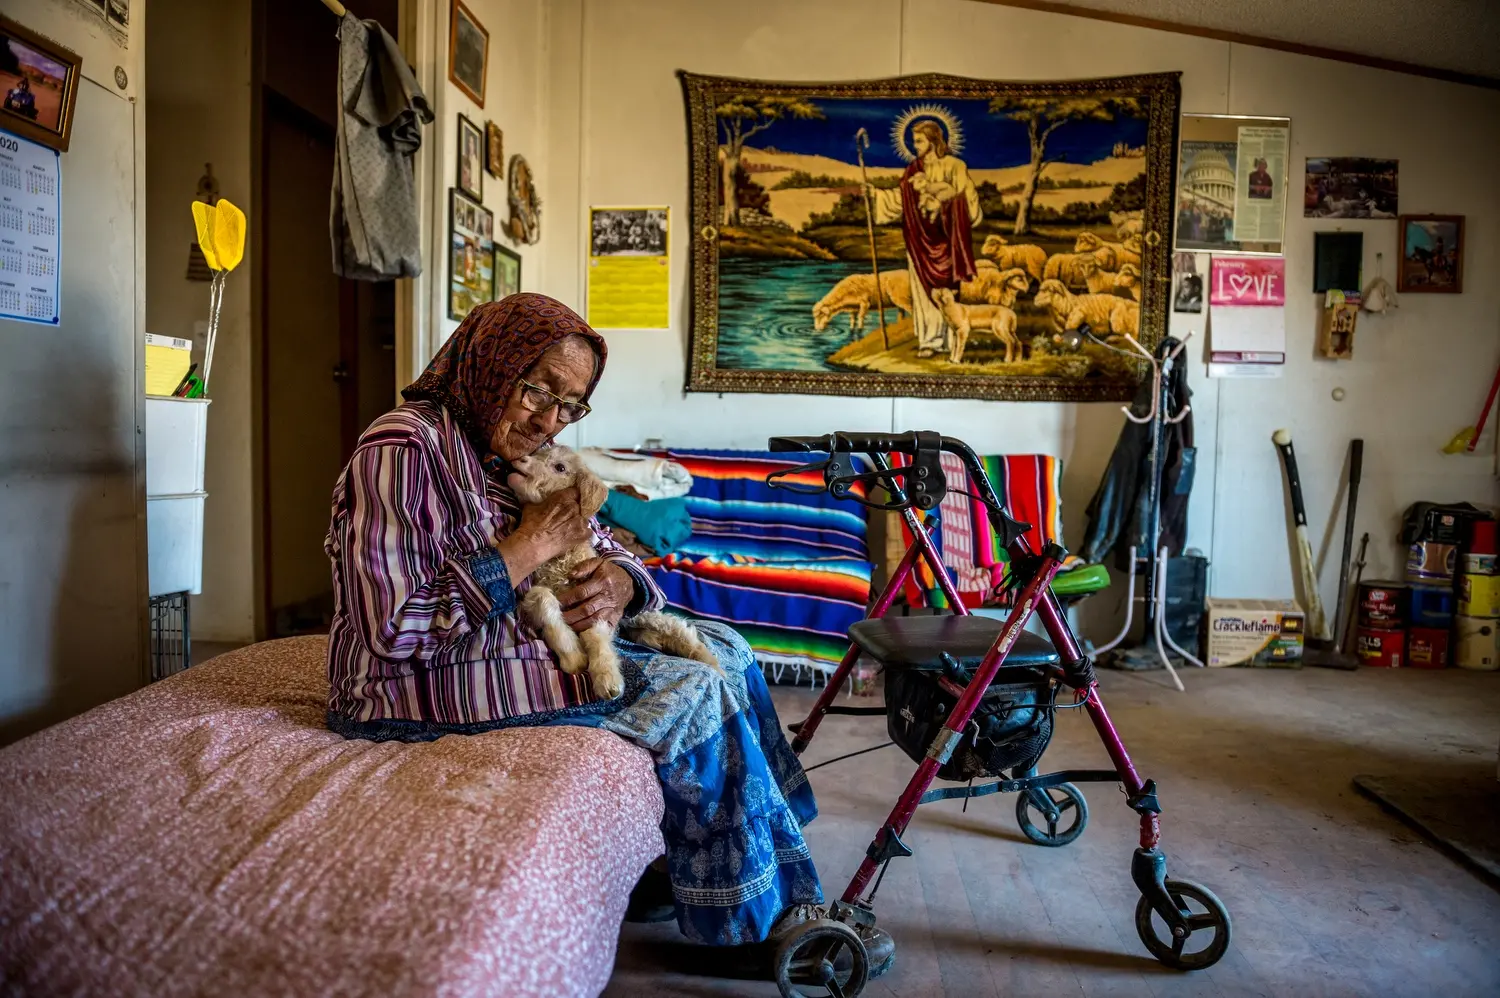 Helen Nez holding a lamb in her home in Blue Gap, Ariz. Image by Mary F. Calvert. United States, 2020.